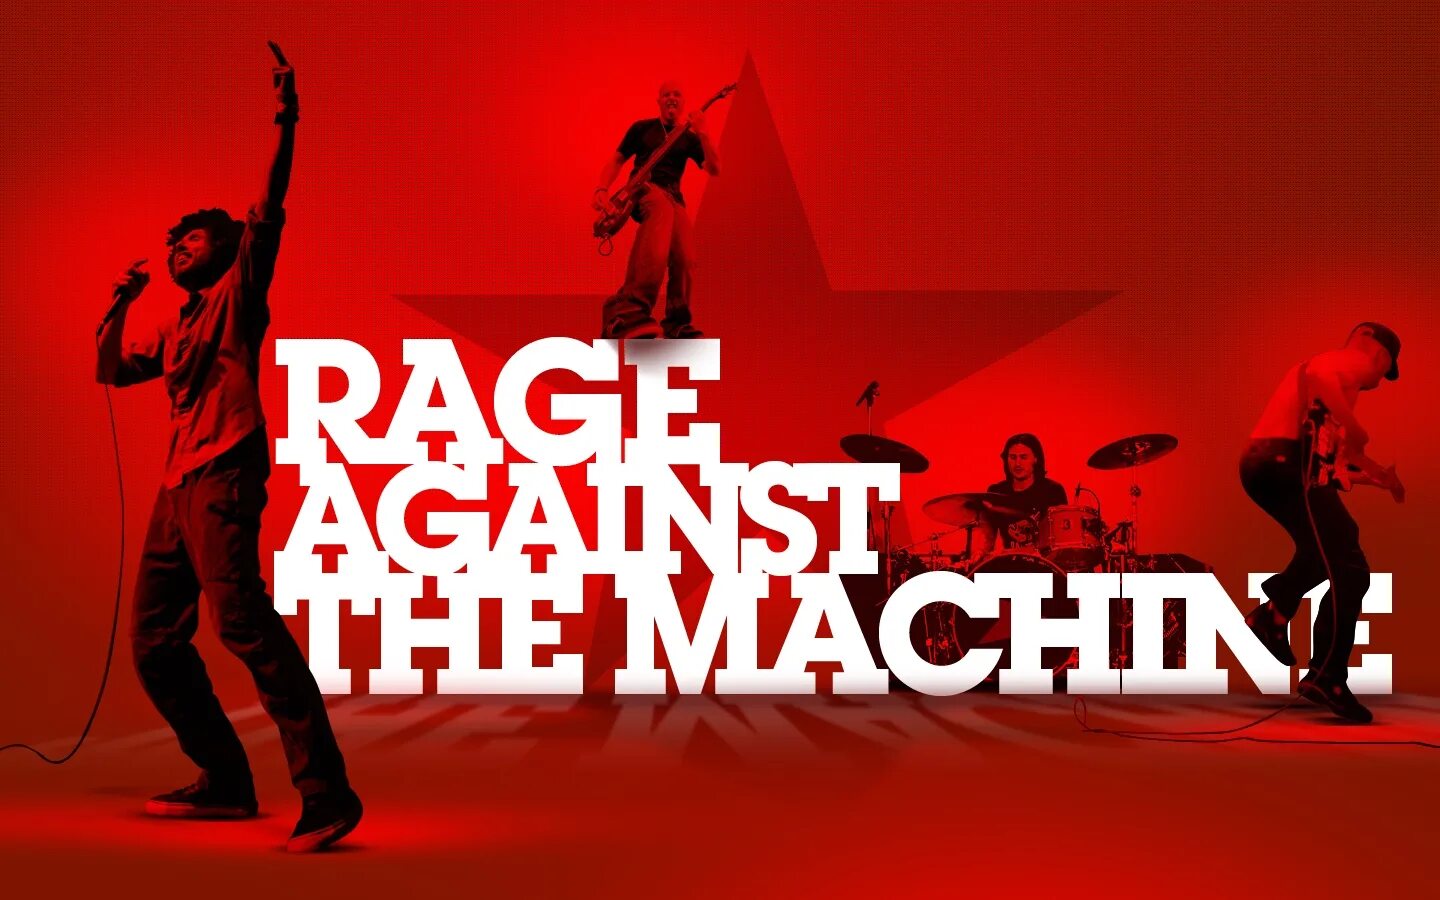 RATM Rage against the Machine. Rage against the Machine обои. Rage against the Machine poster. Плакат Rage against the Machine. Ratm